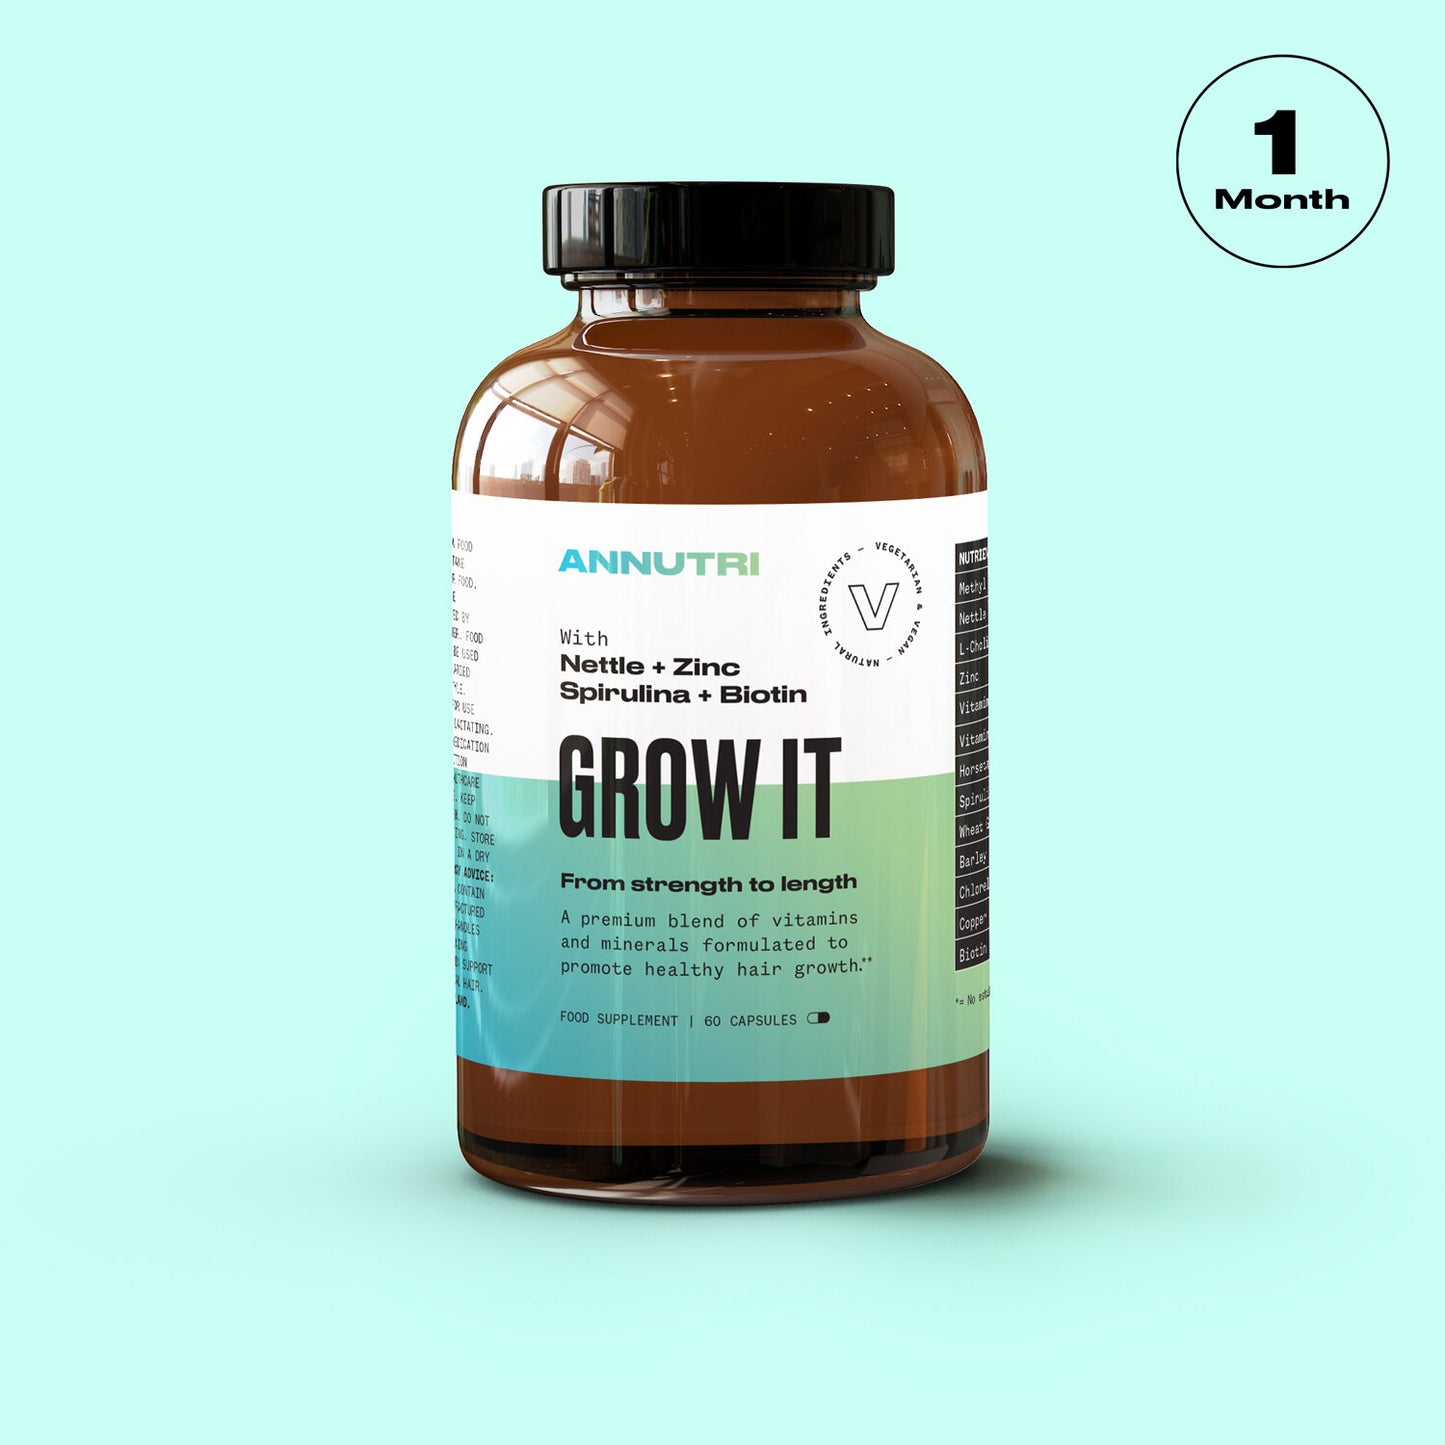 PRE ORDER Grow It Hair Supplement - 1 Month